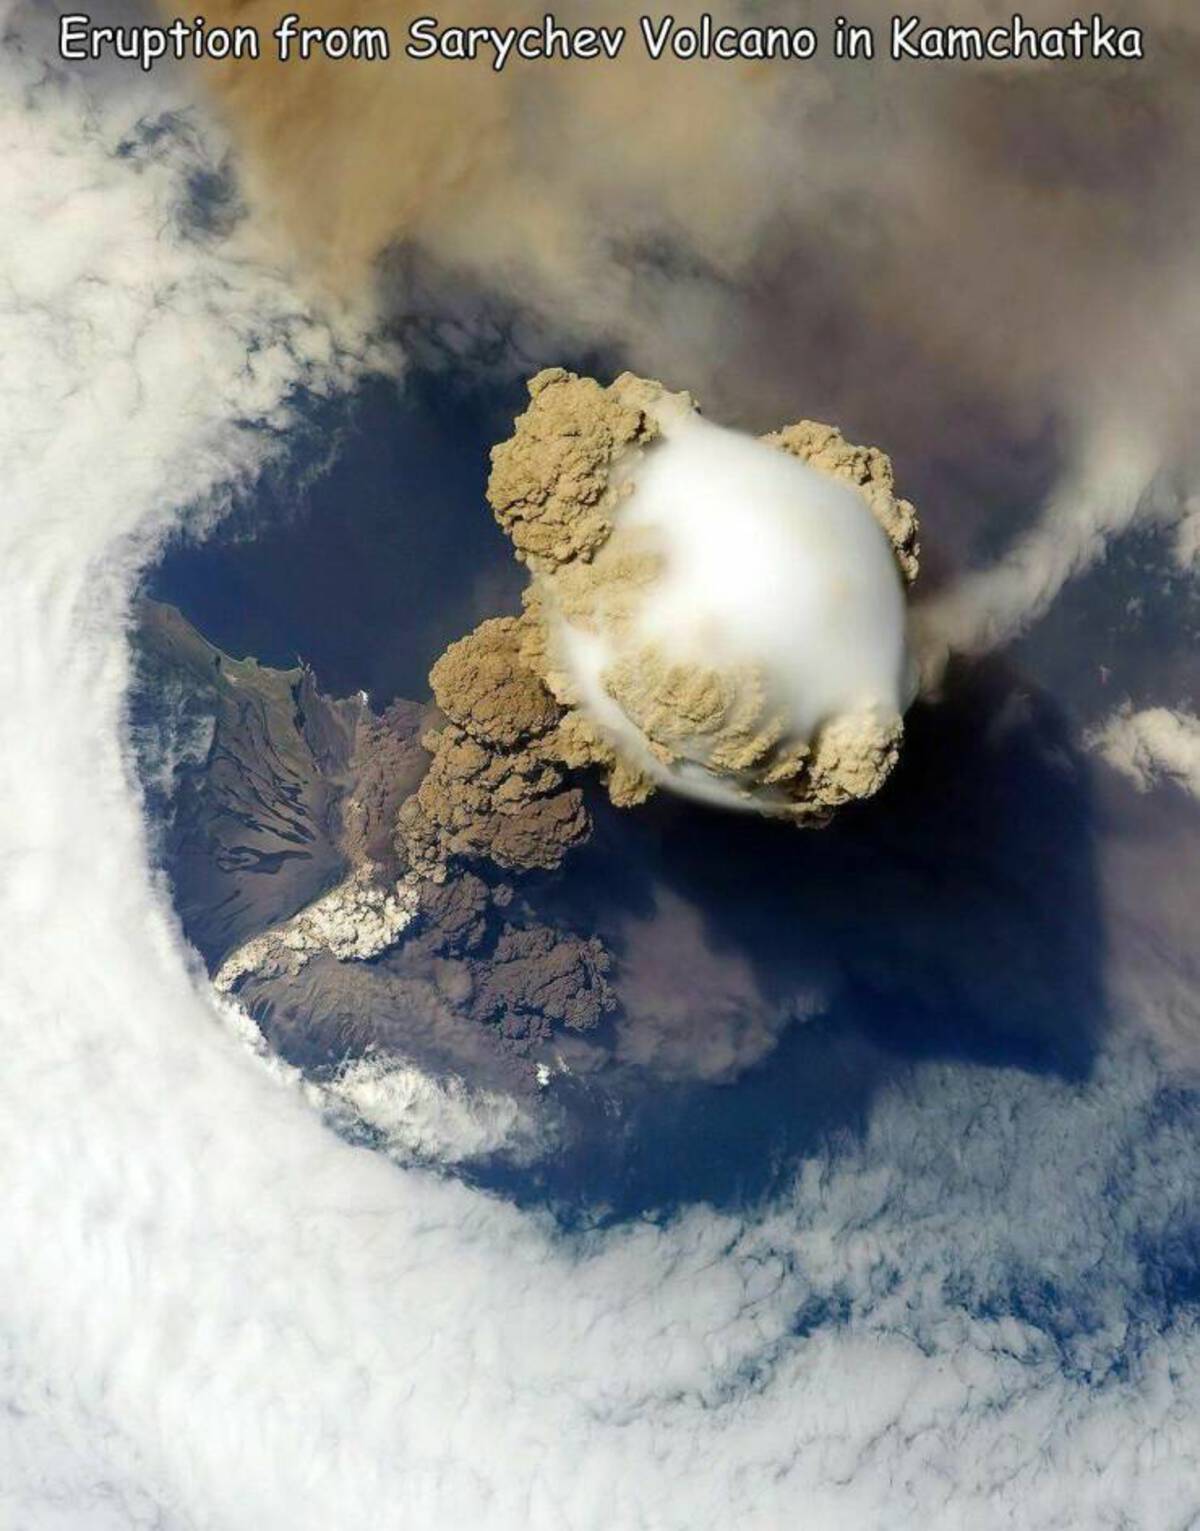 volcanic eruptions from space - Eruption from Sarychev Volcano in Kamchatka